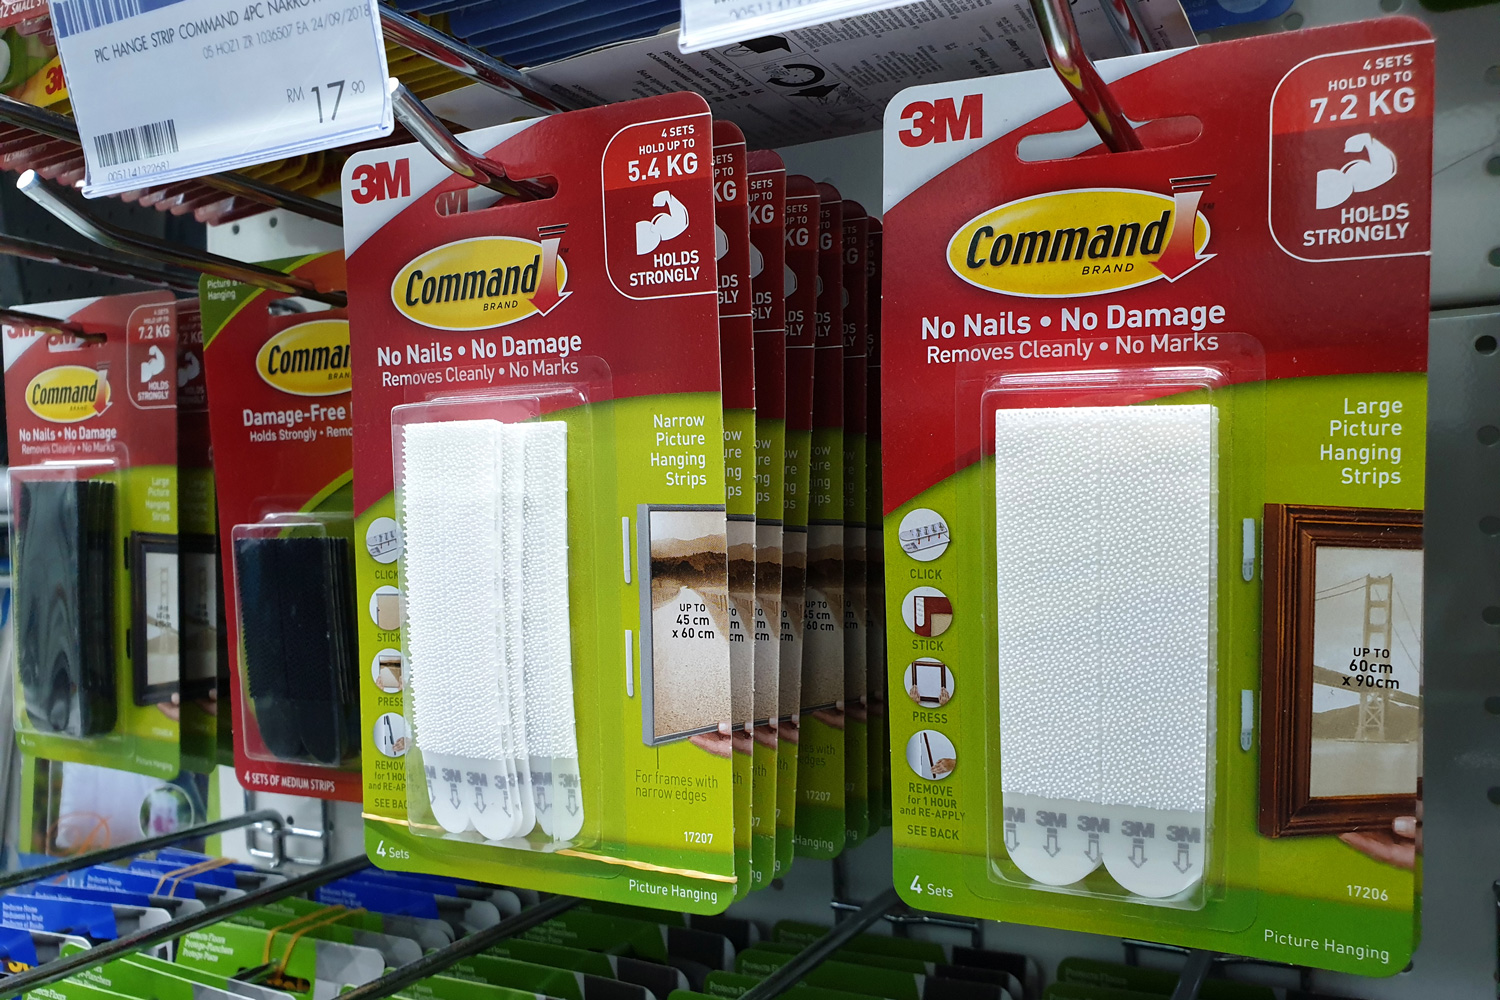 Command brand Picture Hanging Strips and Hooks by 3M company on store shelf